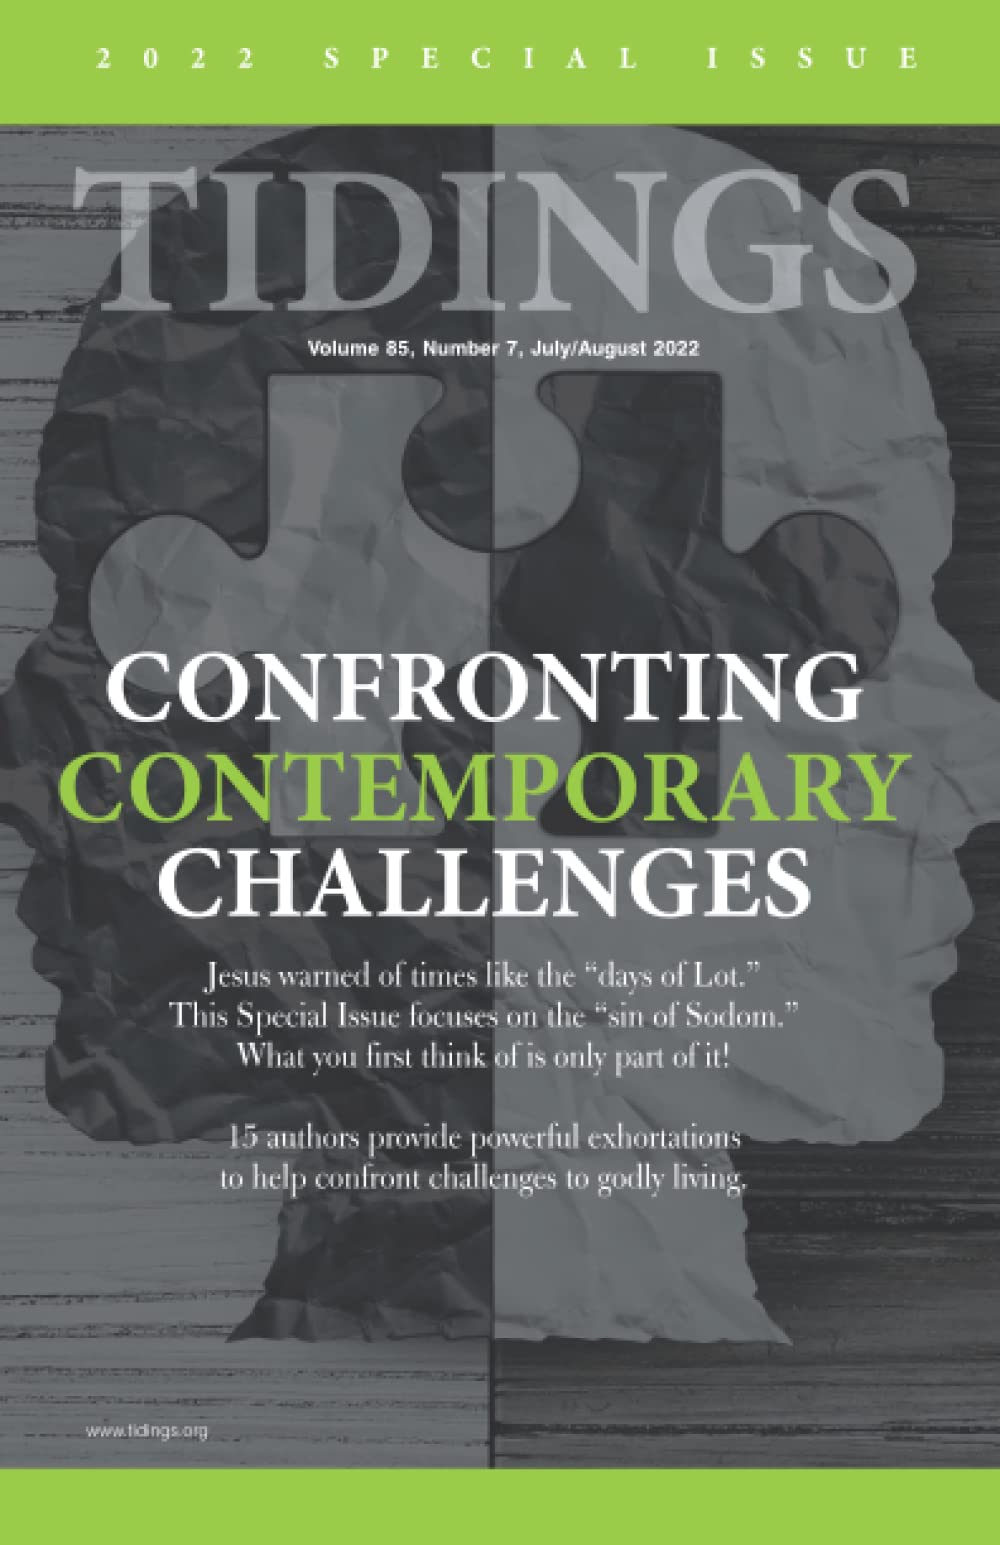 Confronting Contemporary Challenges, Tidings